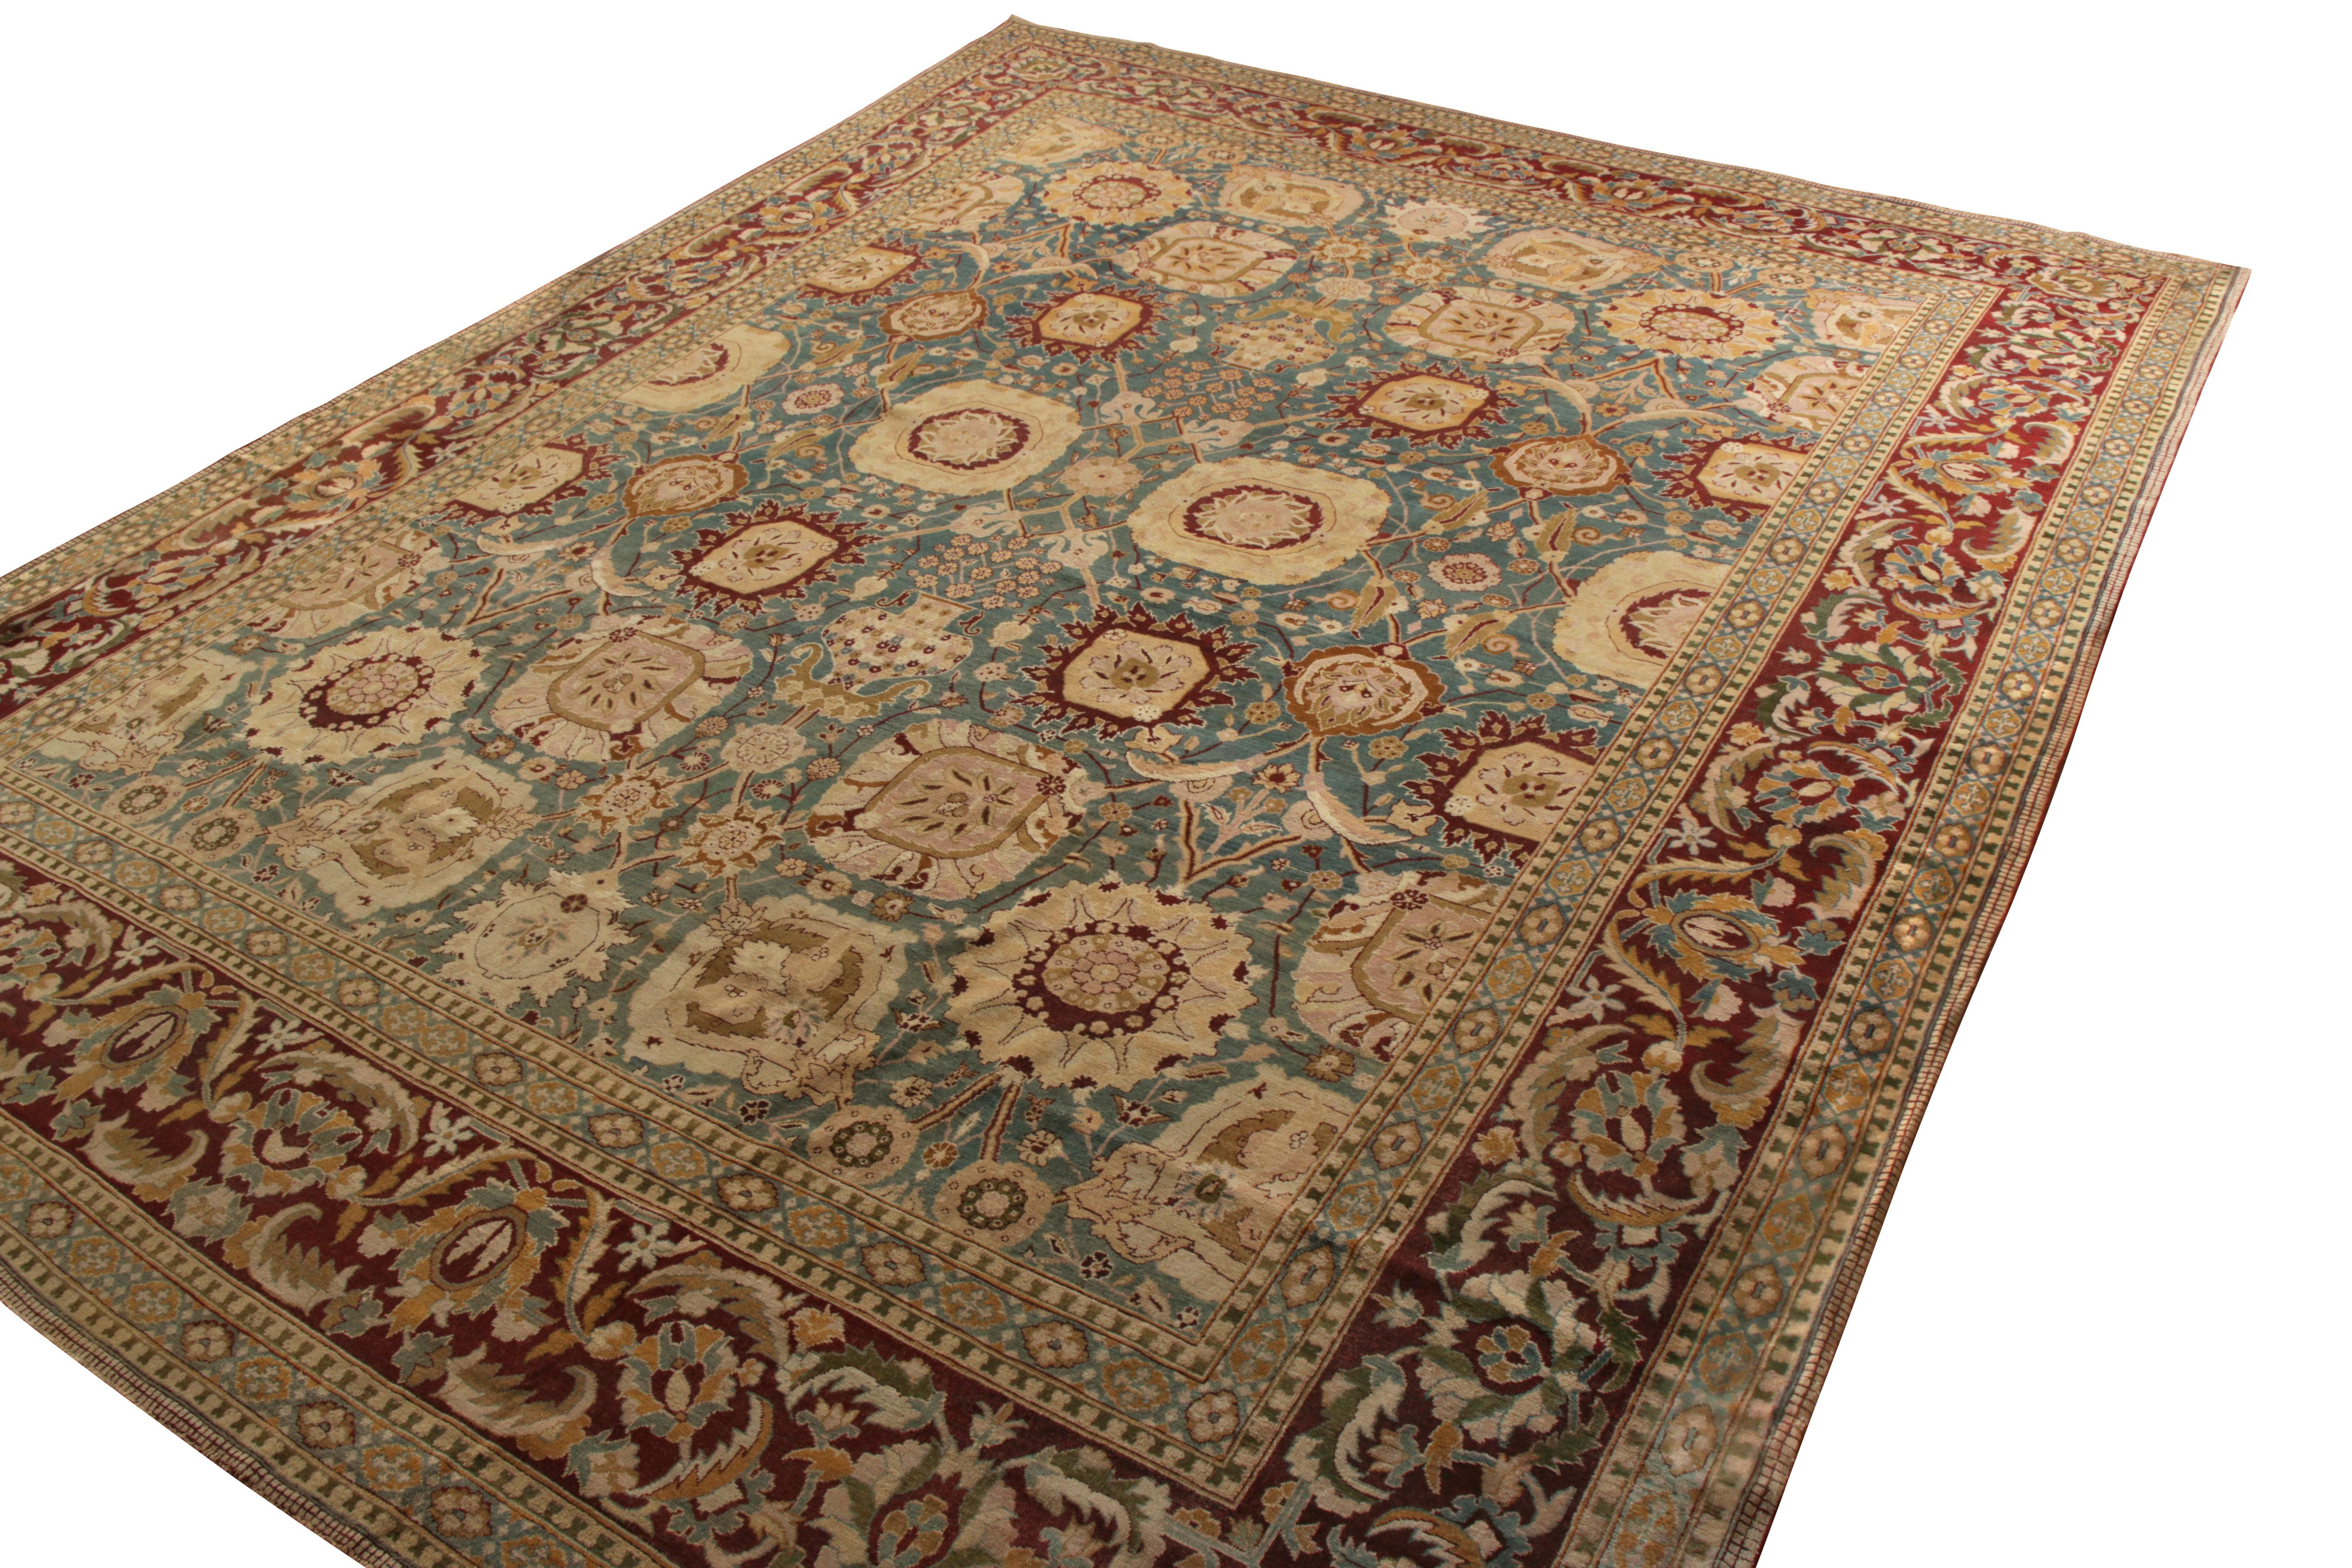 Other Antique Amritsar Rug in Blue with Gold & Red Floral Patterns, from Rug & Kilim For Sale